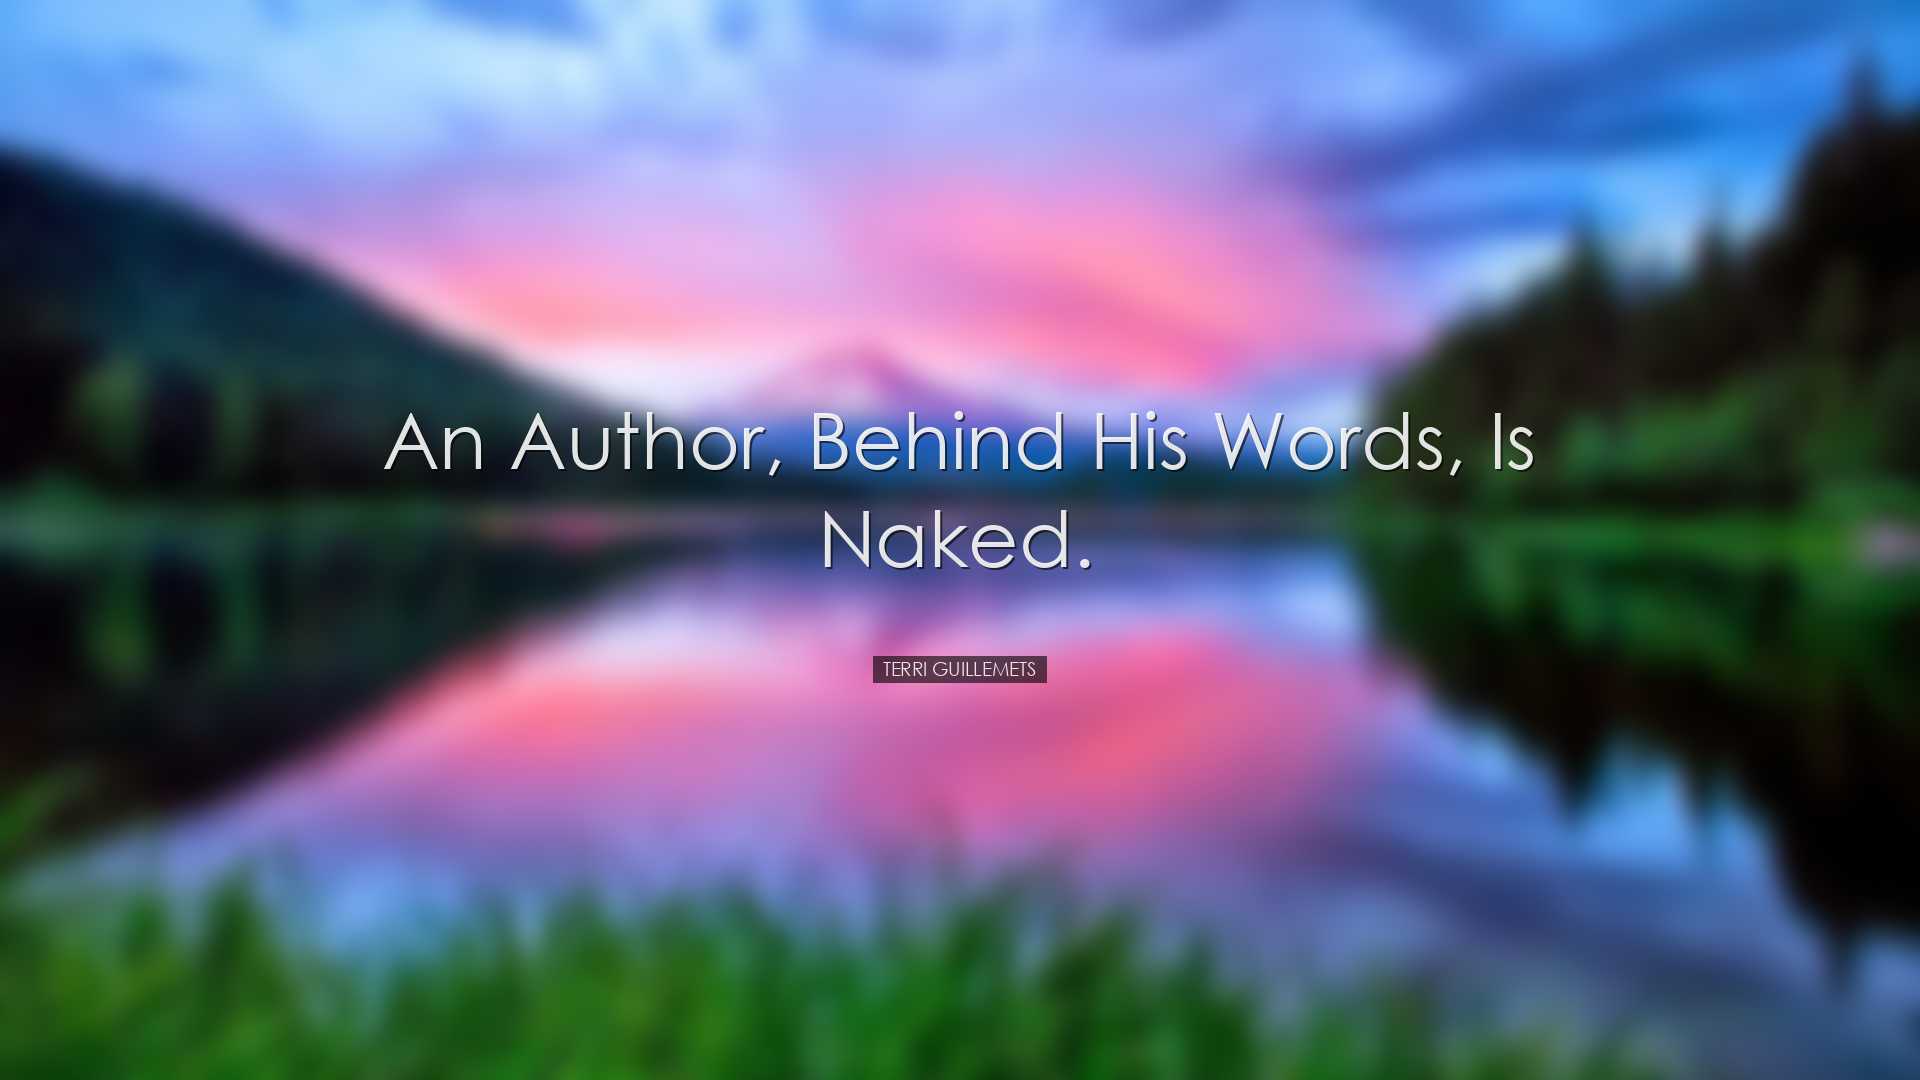 An author, behind his words, is naked. - Terri Guillemets